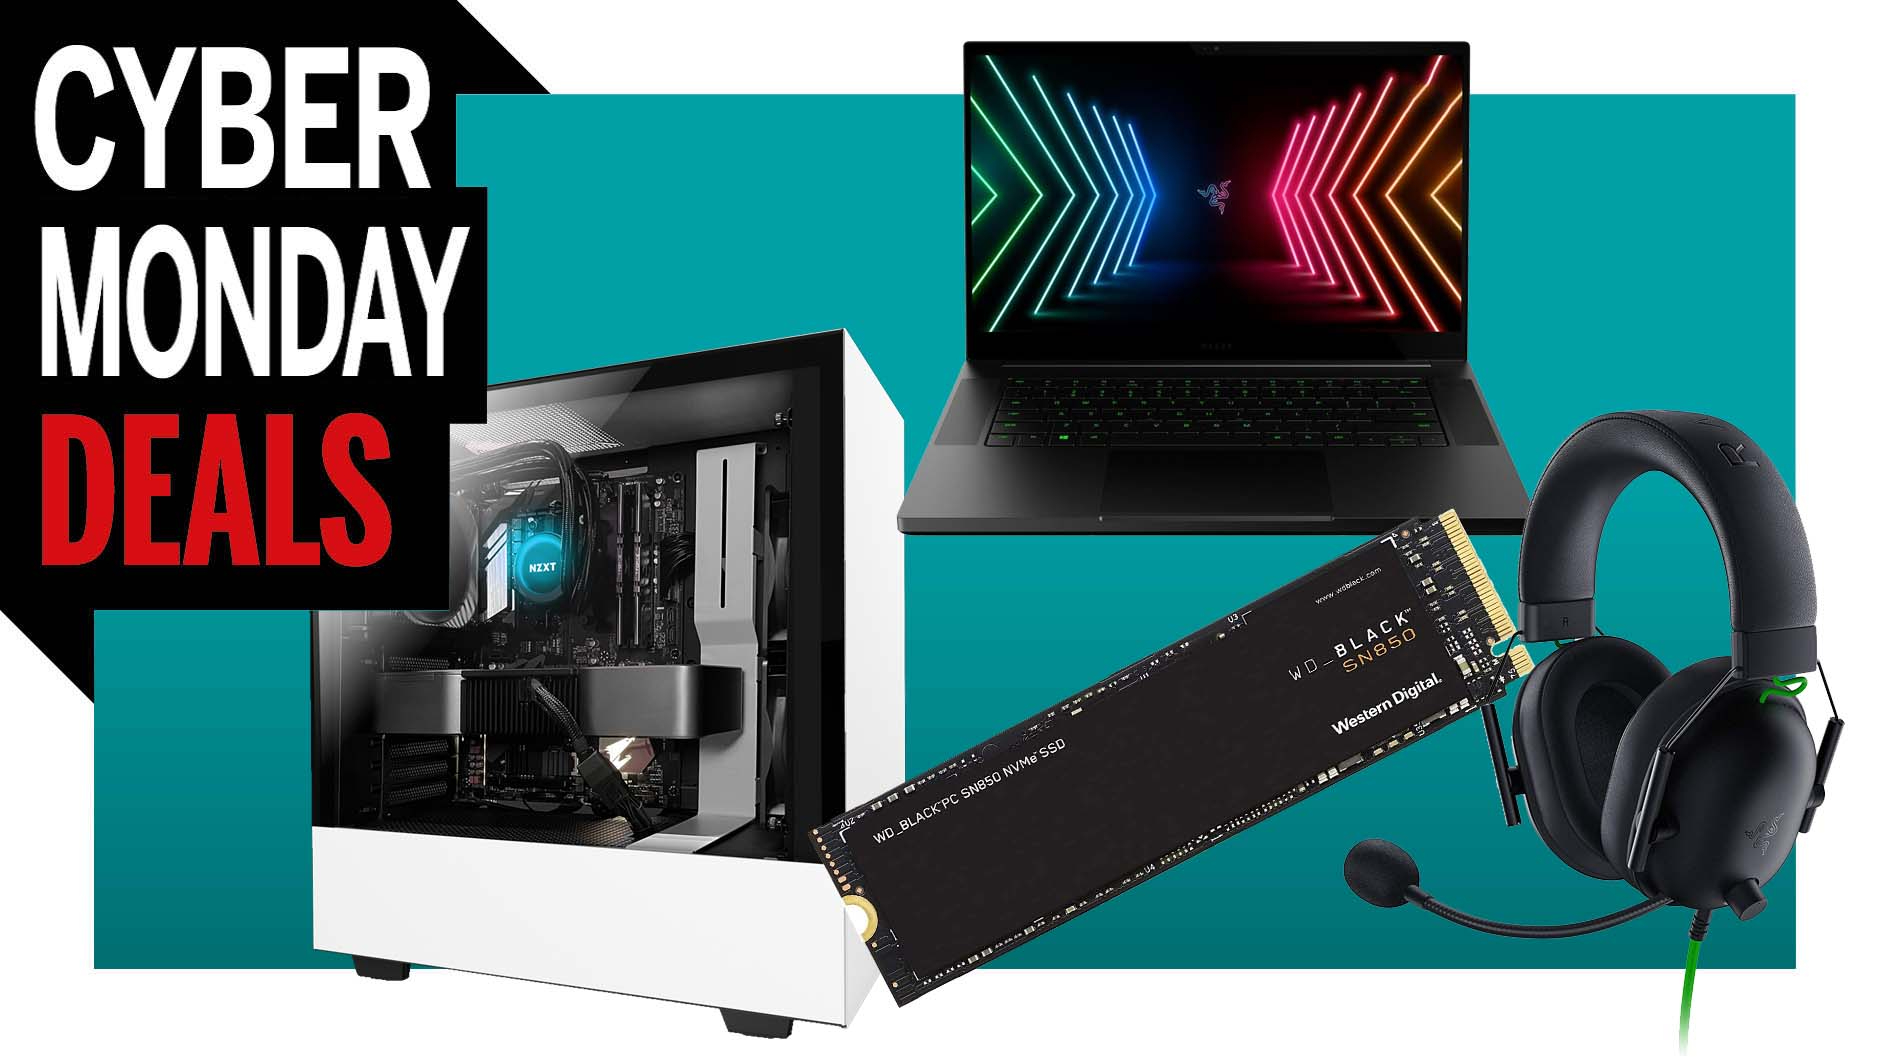  Cyber Monday PC gaming deals UK: the best deals on PCs, components, and peripherals 